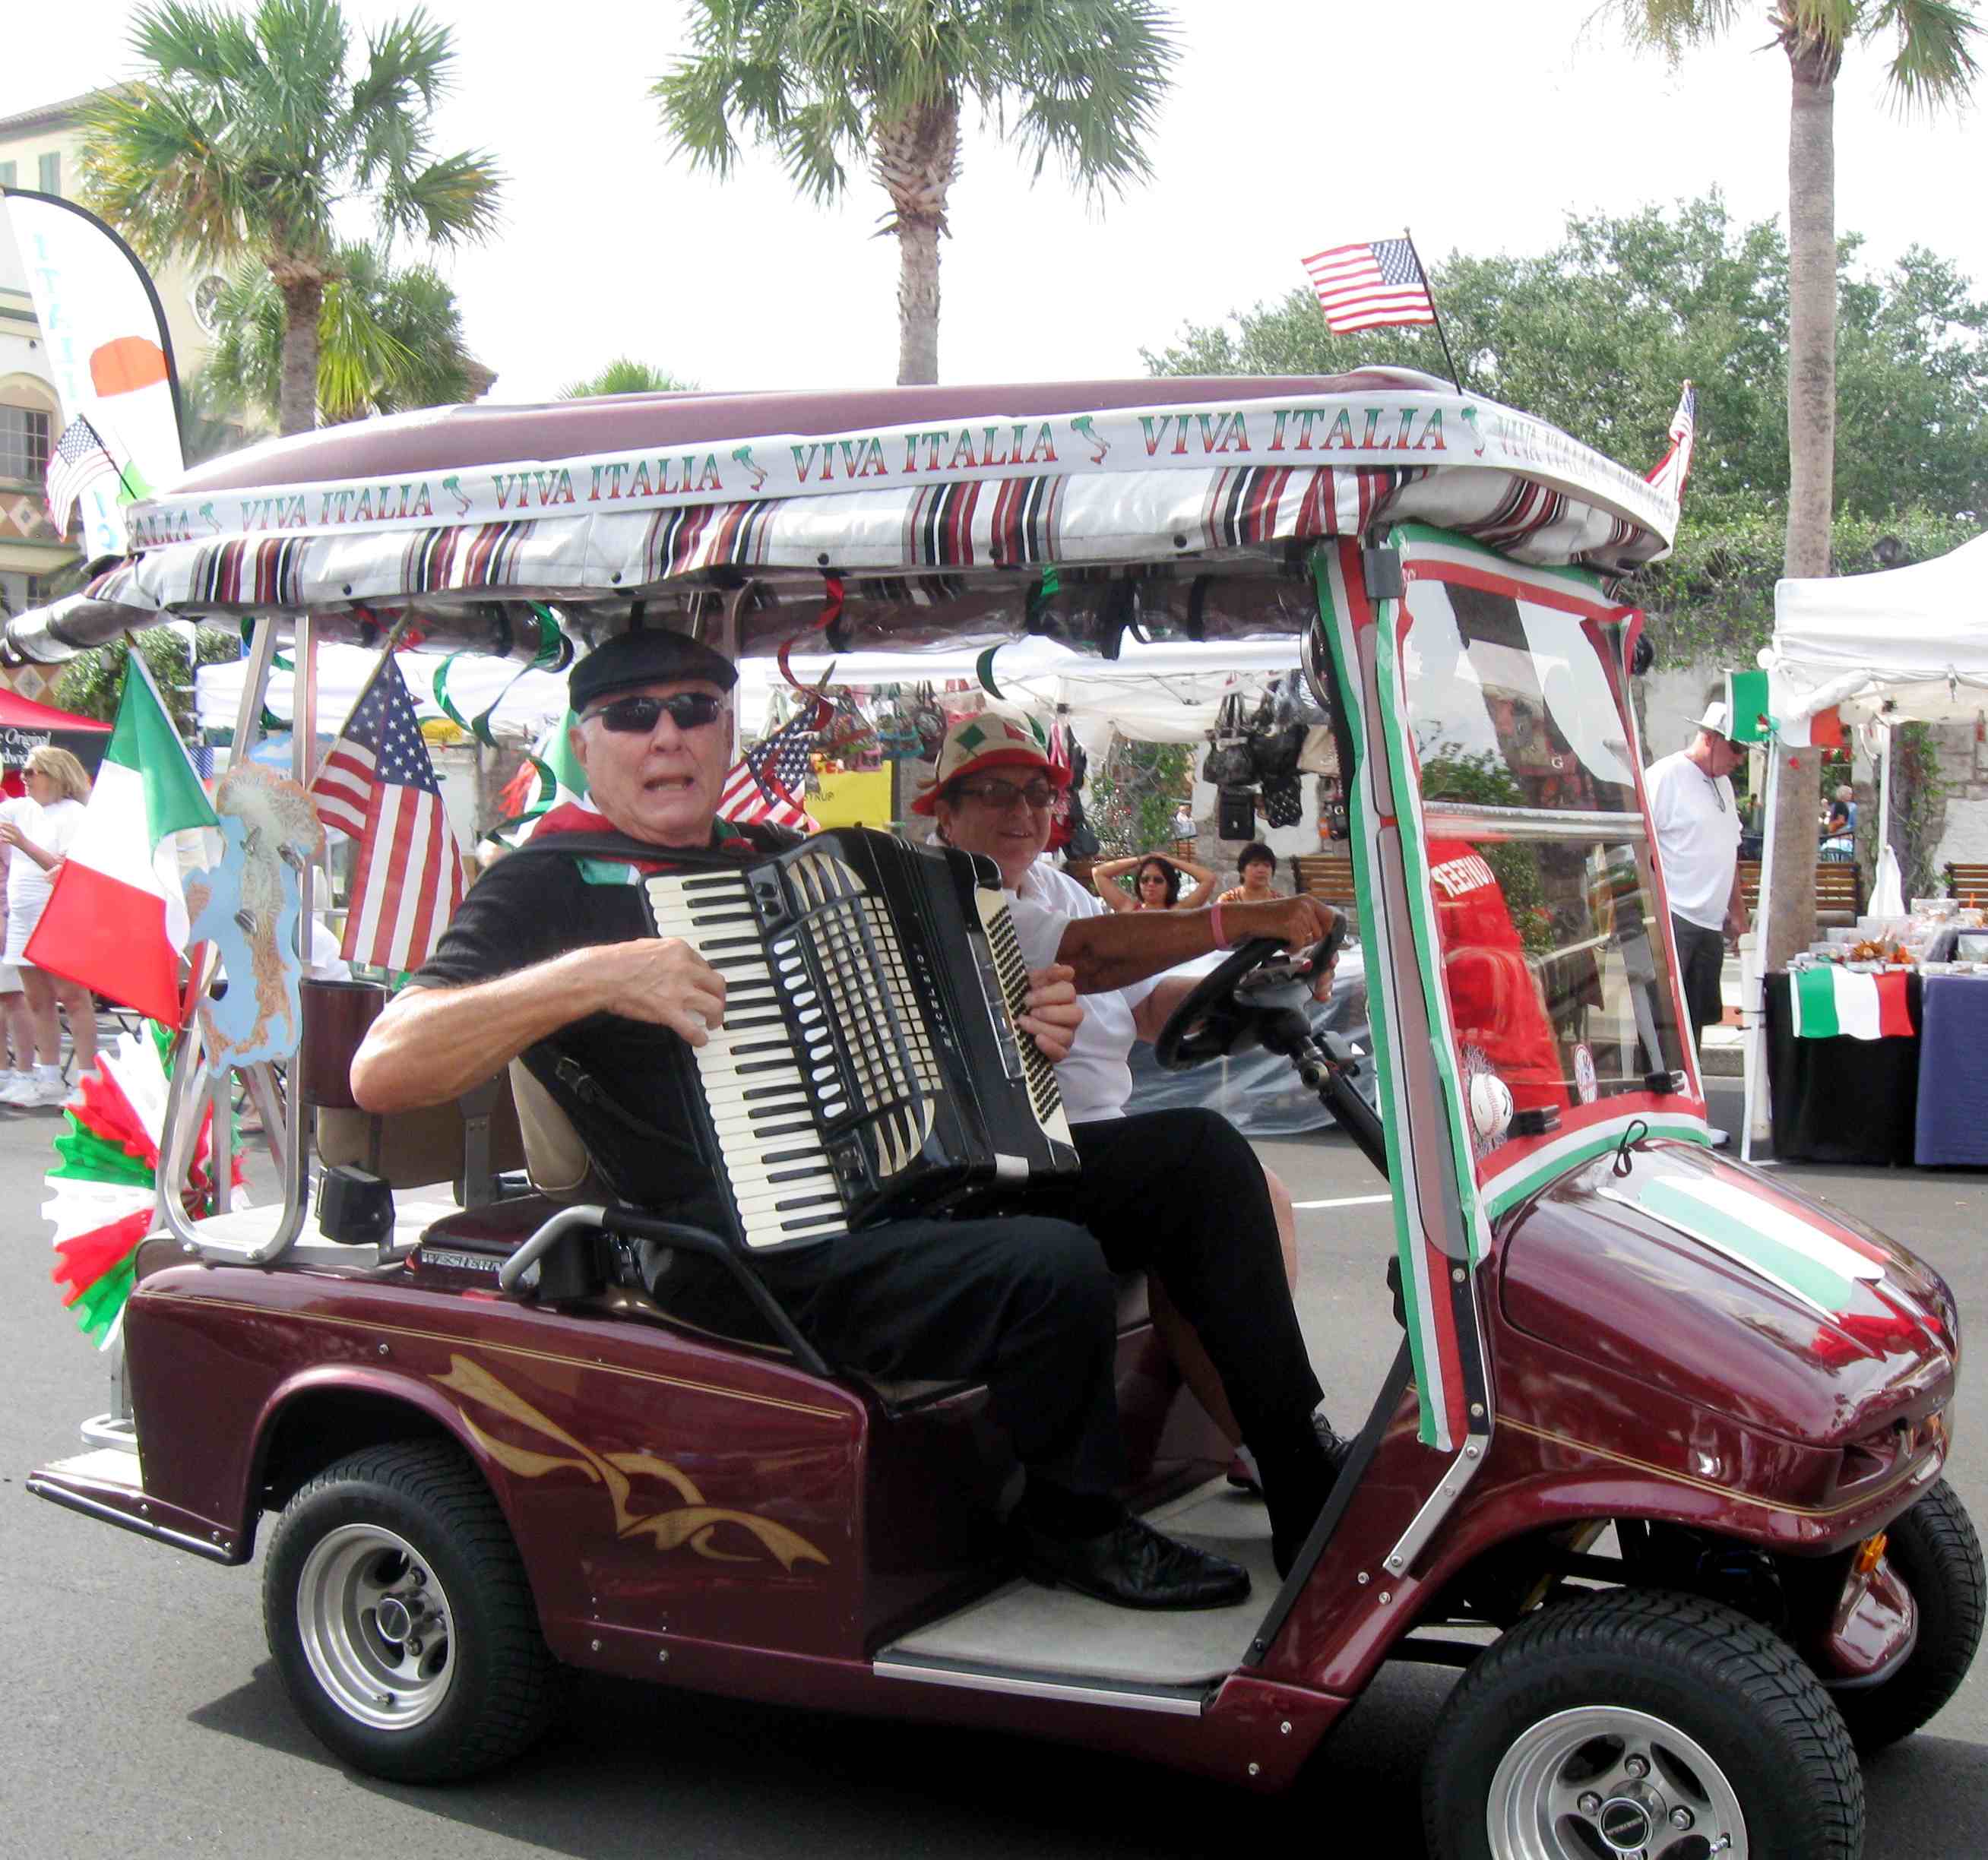 Celebrate Italian-American pride during parade Tuesday at Spanish Springs